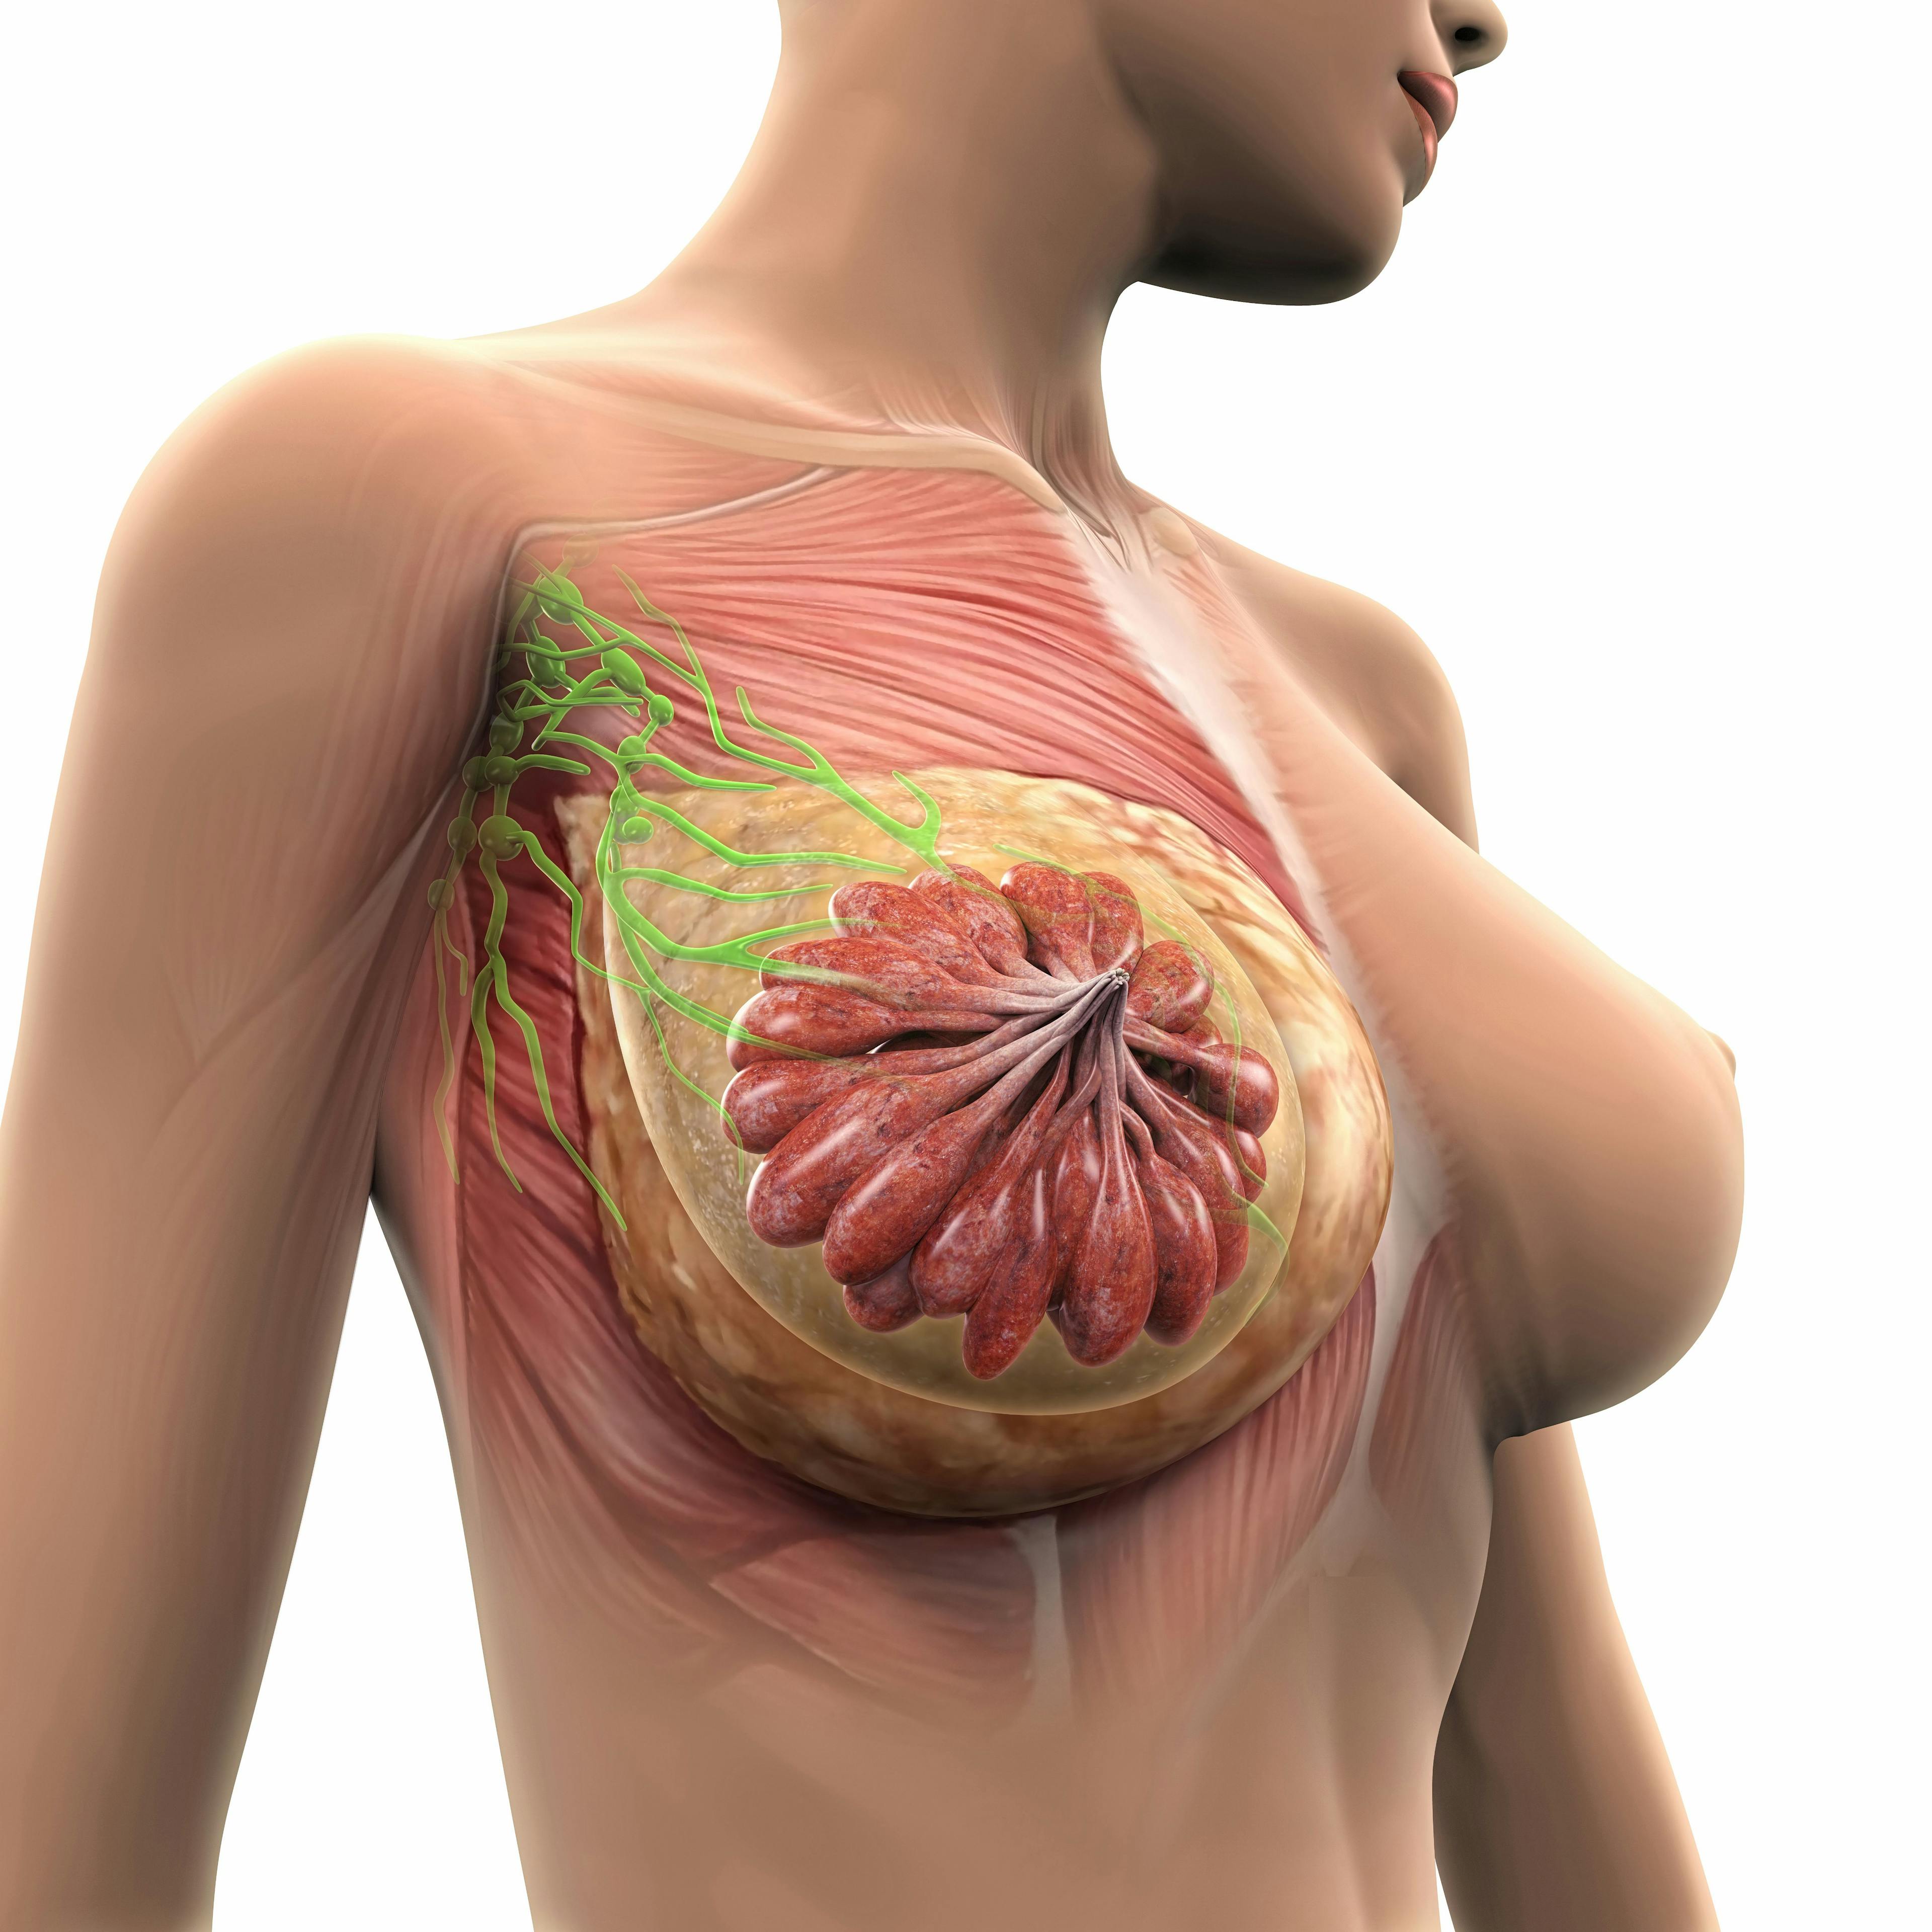 Patients with node-positive breast cancer did not have a significant improvement in disease-free survival with the addition of internal mammary node radiation to regional nodal irradiation; however, patients with medically or centrally located tumors could benefit. 